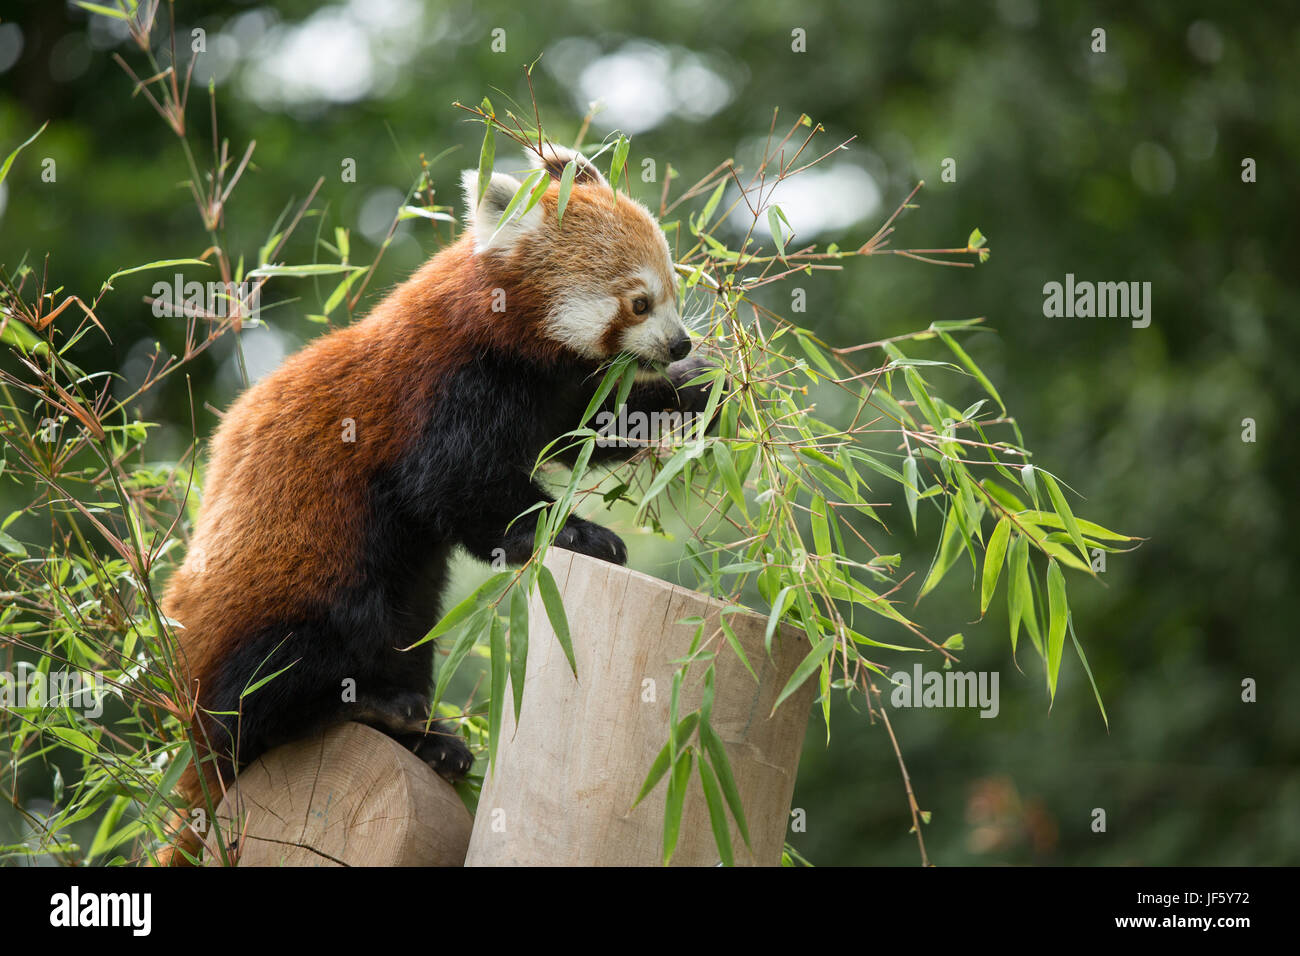 A Red Panda at Birmingham Nature Centre. Birmingham host the IAAF Championships in 2018 and named their Mascot Ruby, a Red Panda after the red Pandas Stock Photo